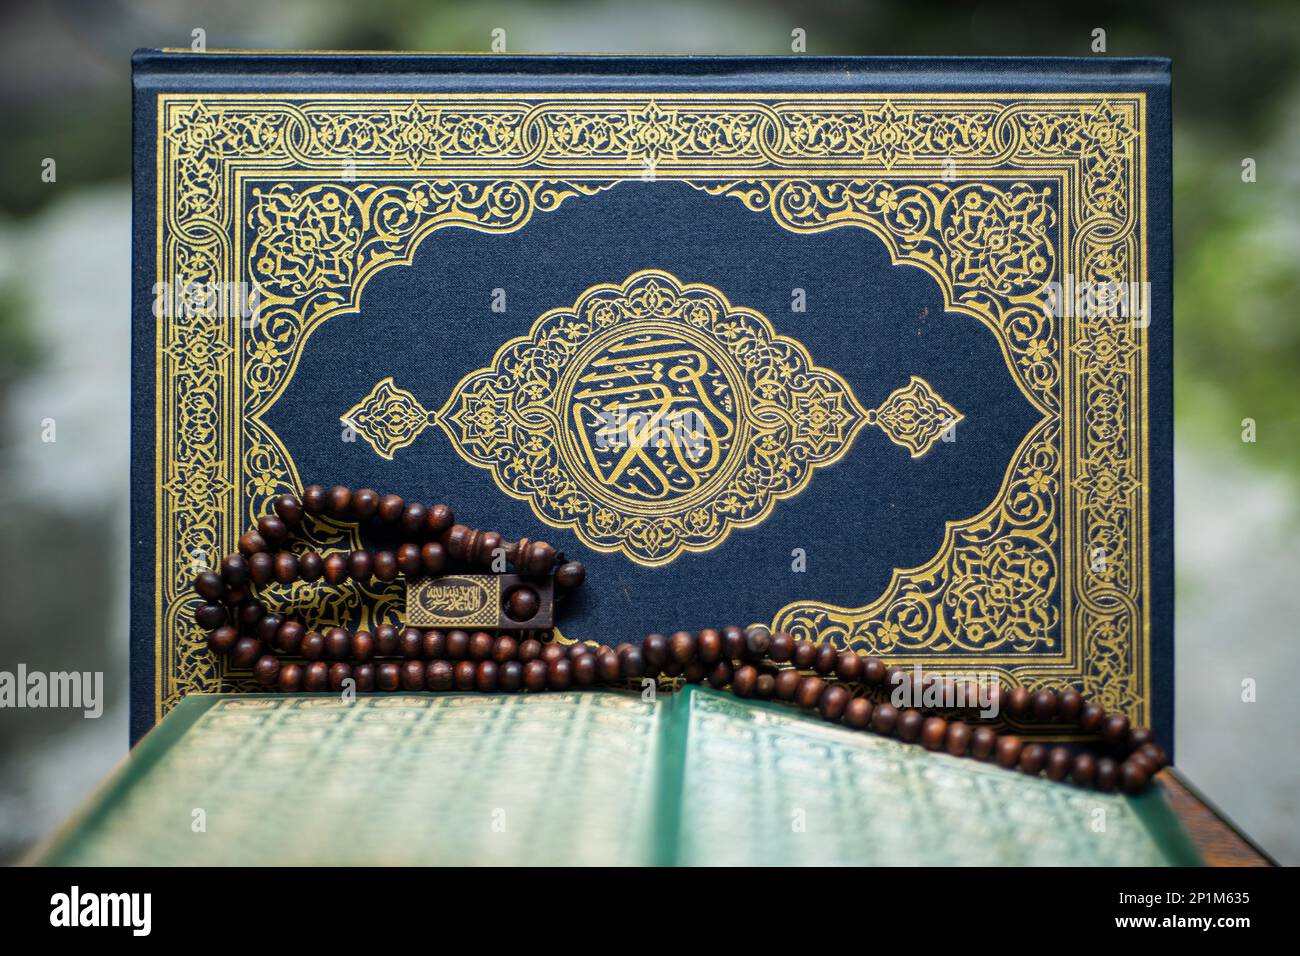 Islamic prayer beads or tasbih in an artistic. It is suitable for background of Ramadan-themed design concepts or other Islamic religious events Stock Photo